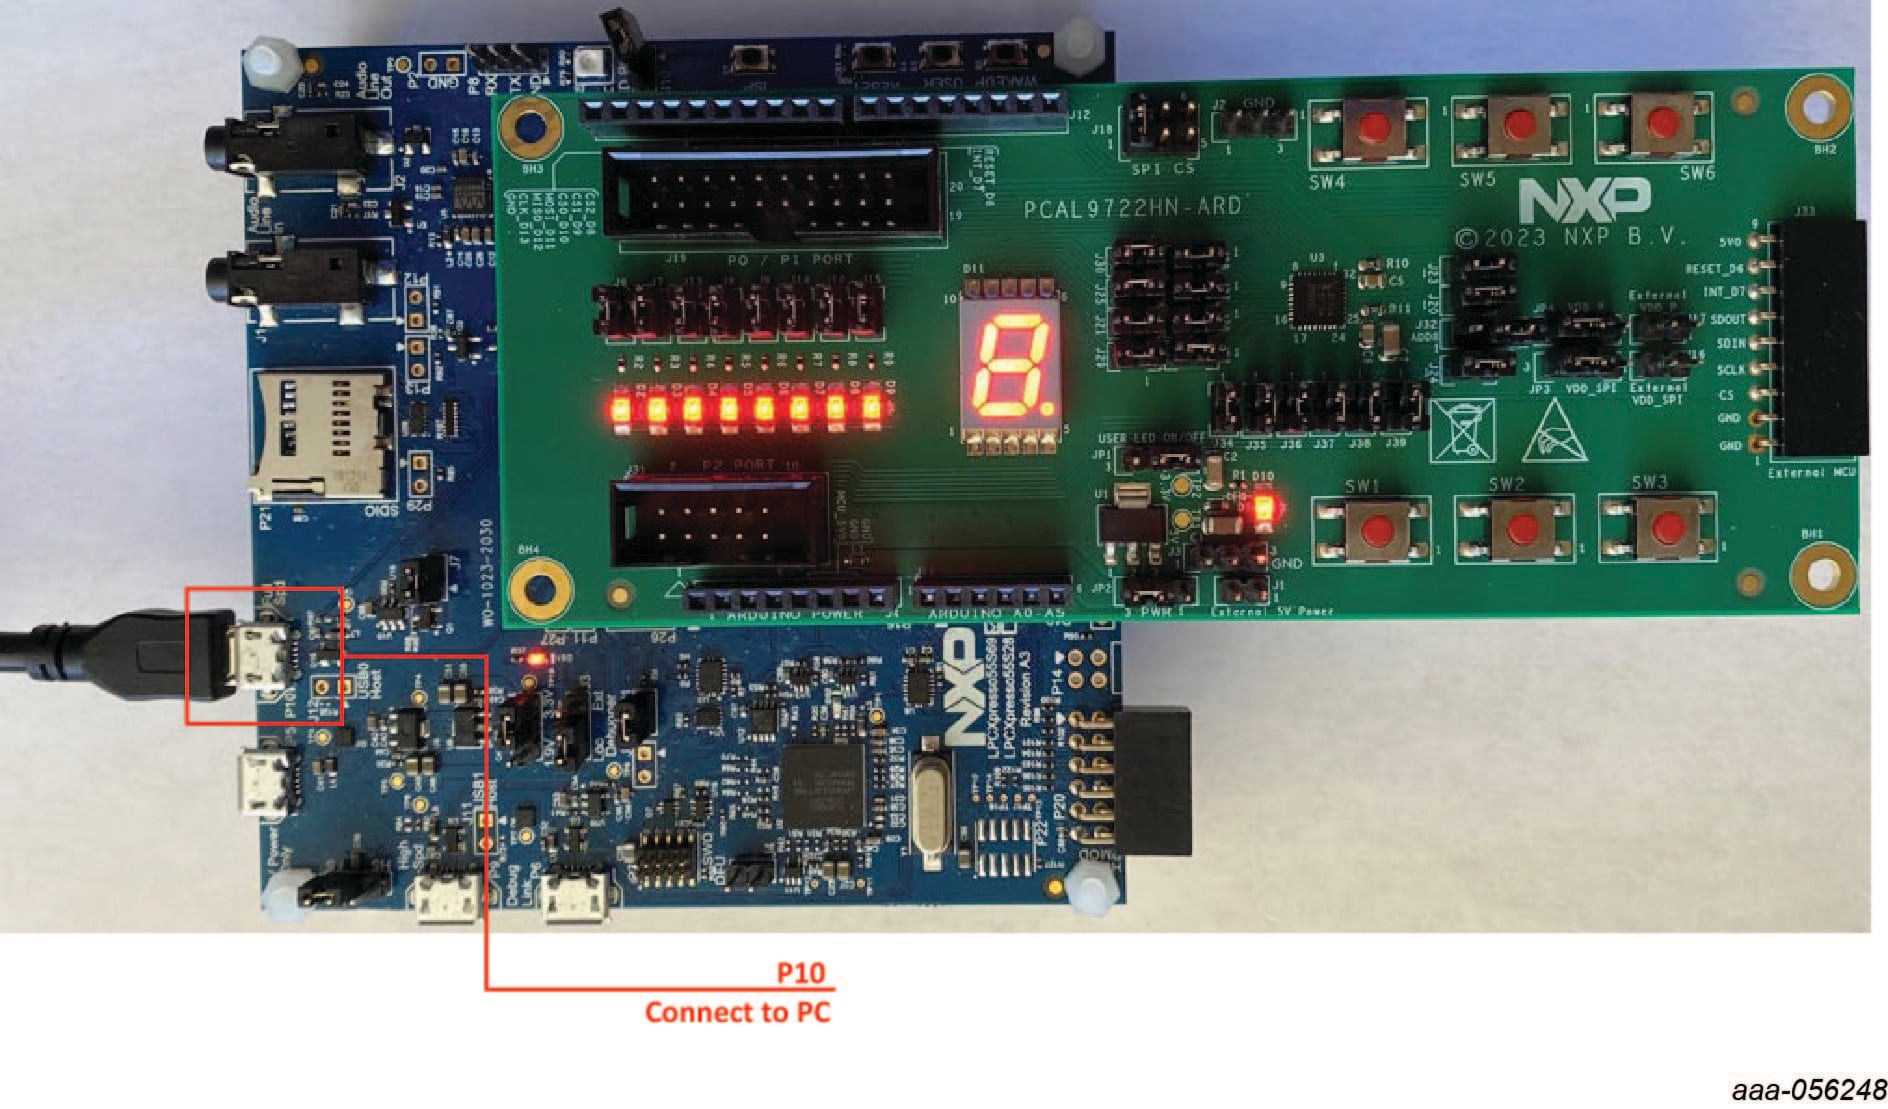 Figure 3. PCAL9722HN-ARD Evaluation Board Connecting to the LPC55S69-EVK MCU Board